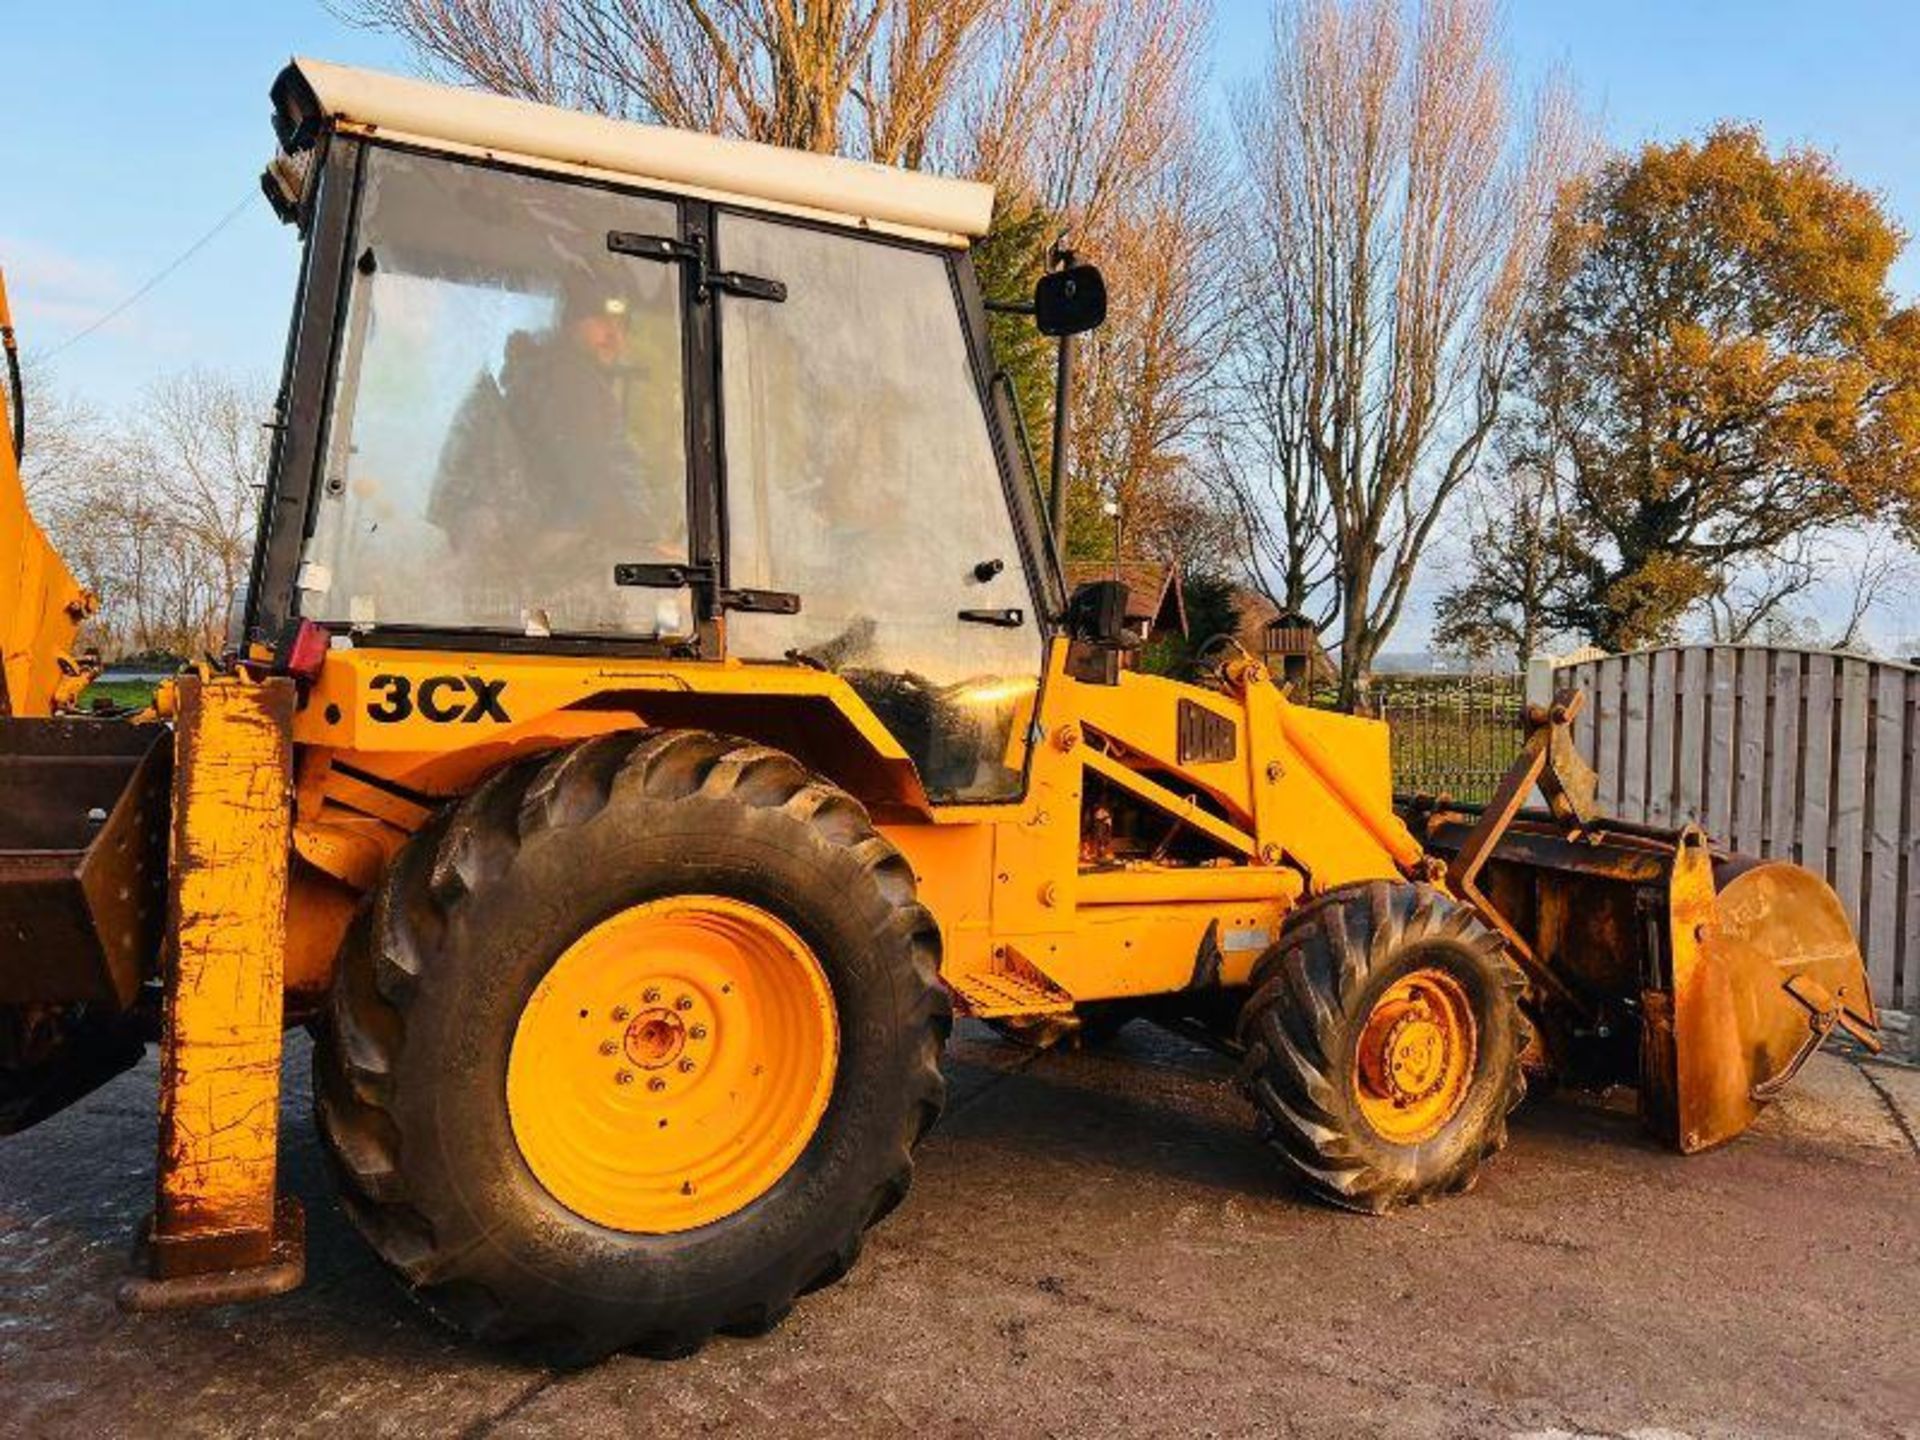 JCB 3CX PROJECT 7 4WD BACKHOE DIGGER C/W 4 X BUCKETS - Image 2 of 10